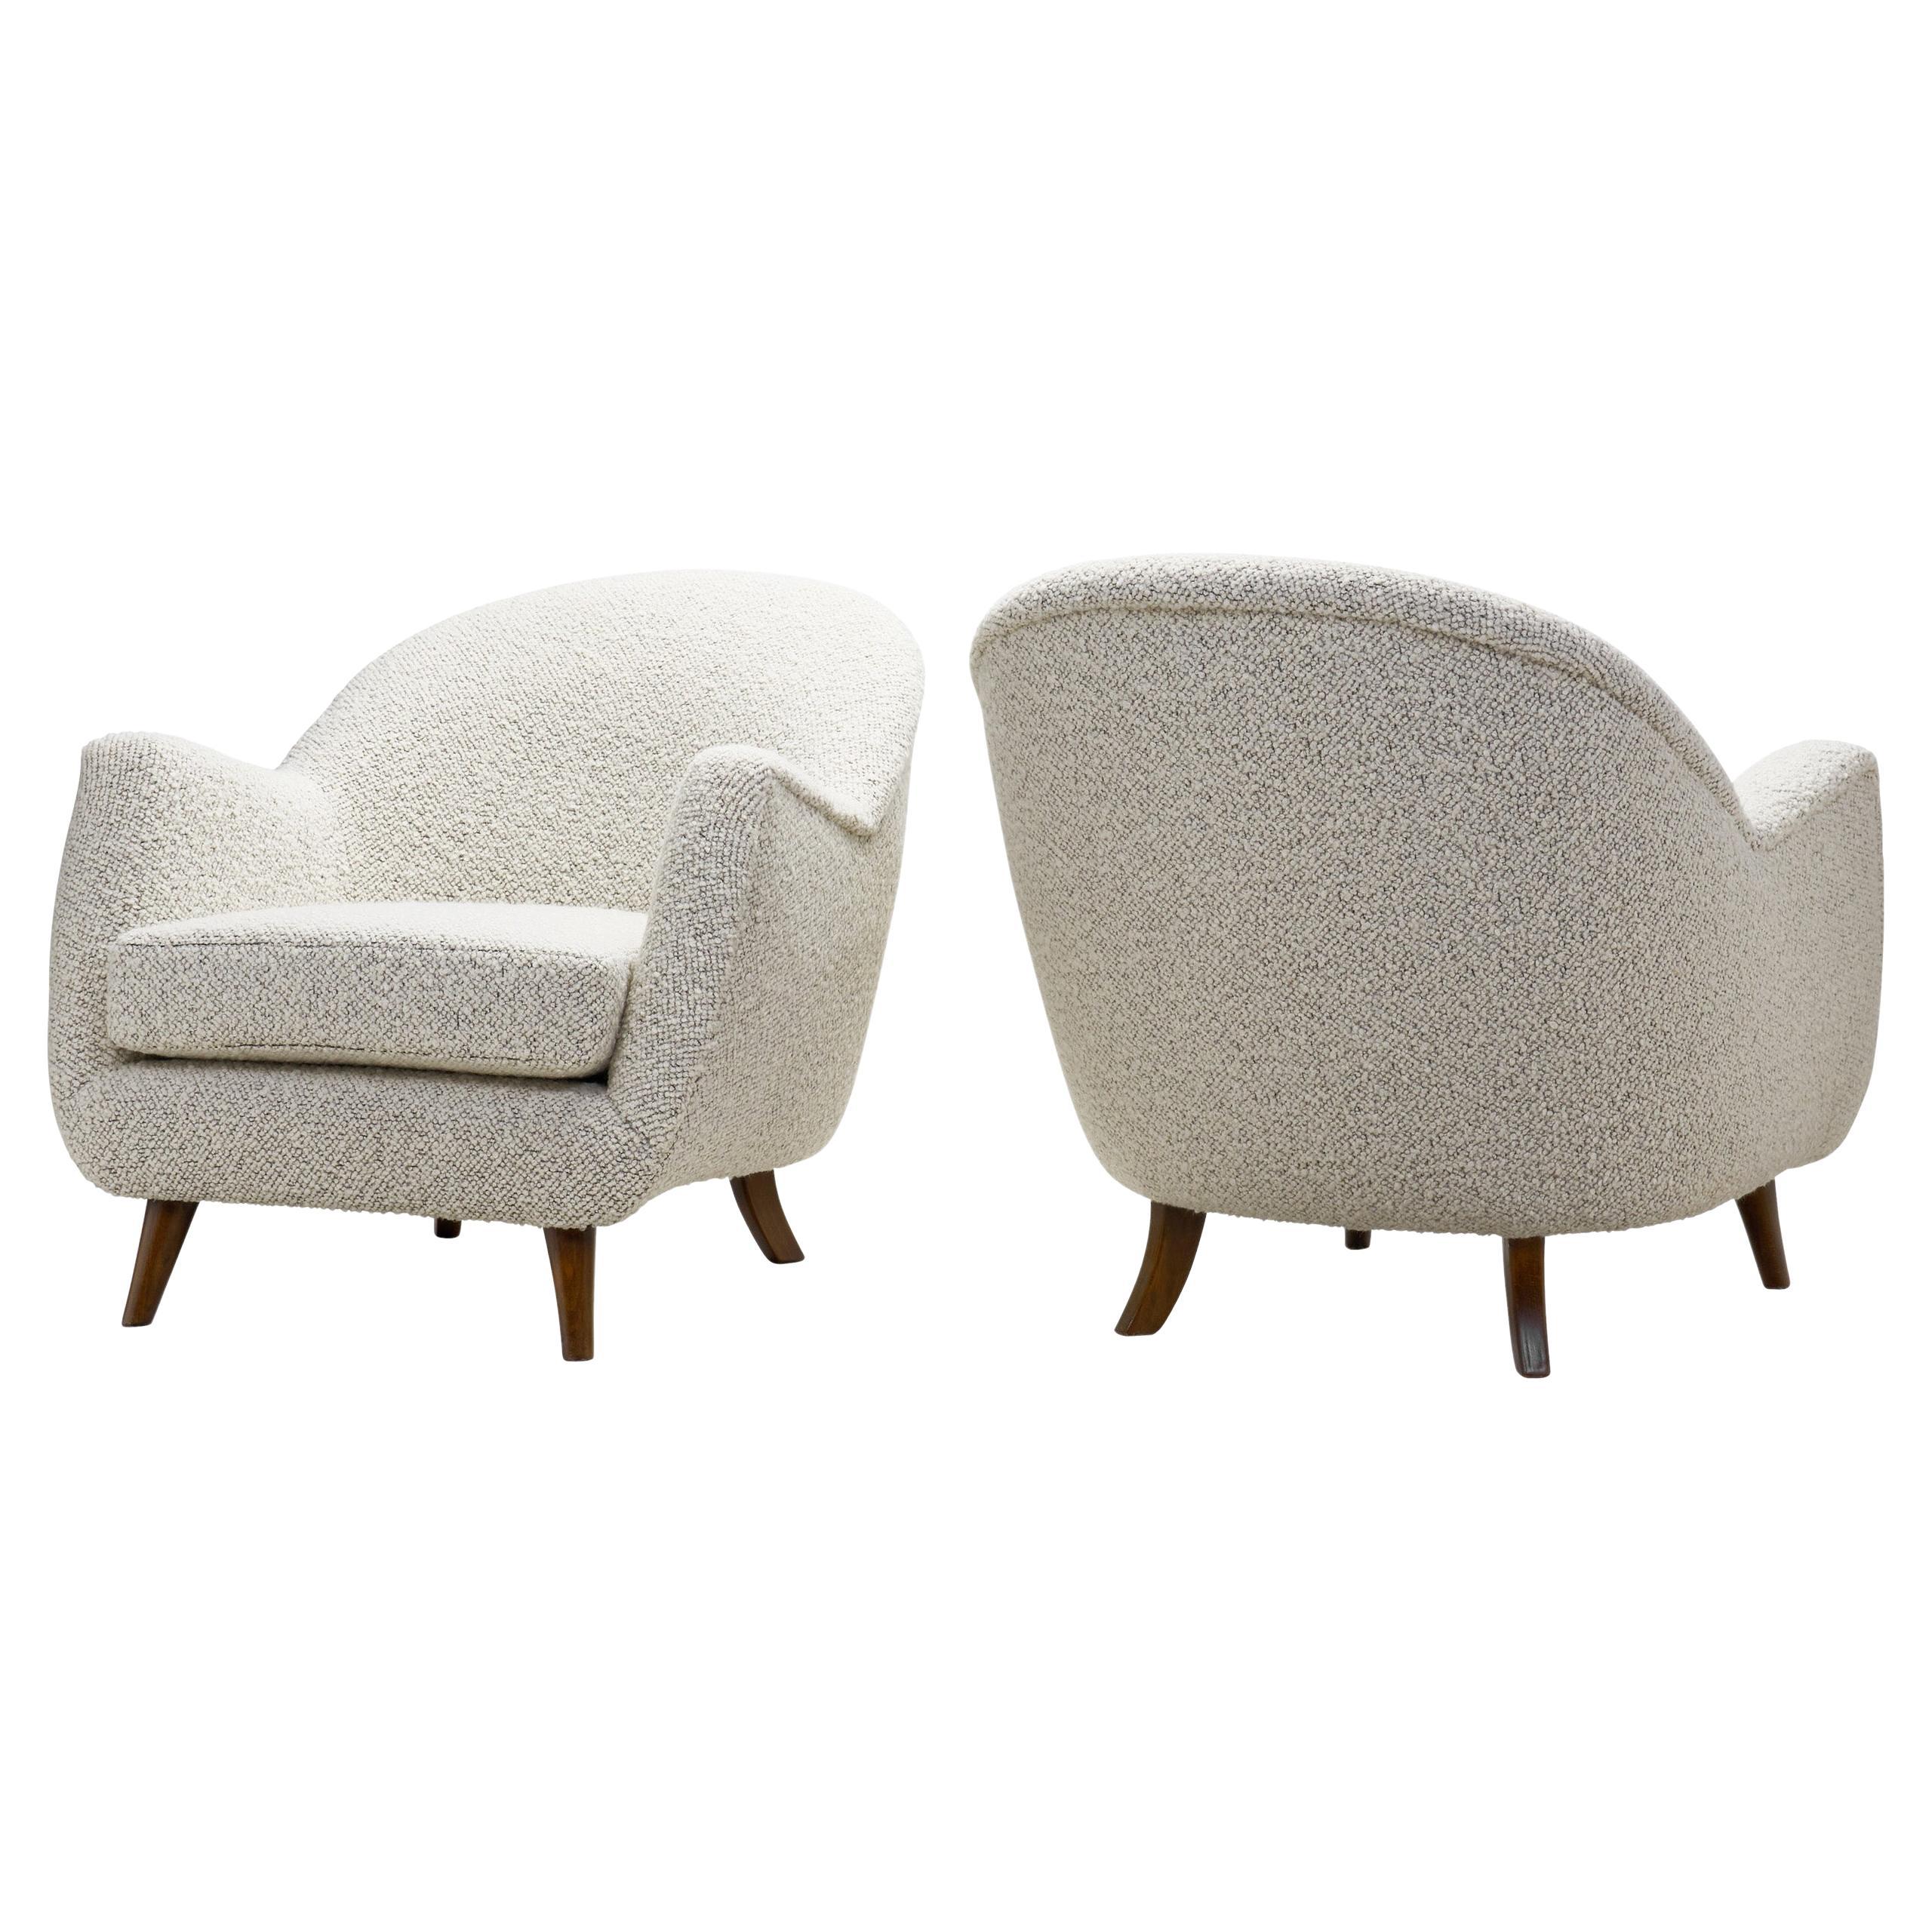 Mid-Century Modern Armchairs, Europe Late 20th Century For Sale